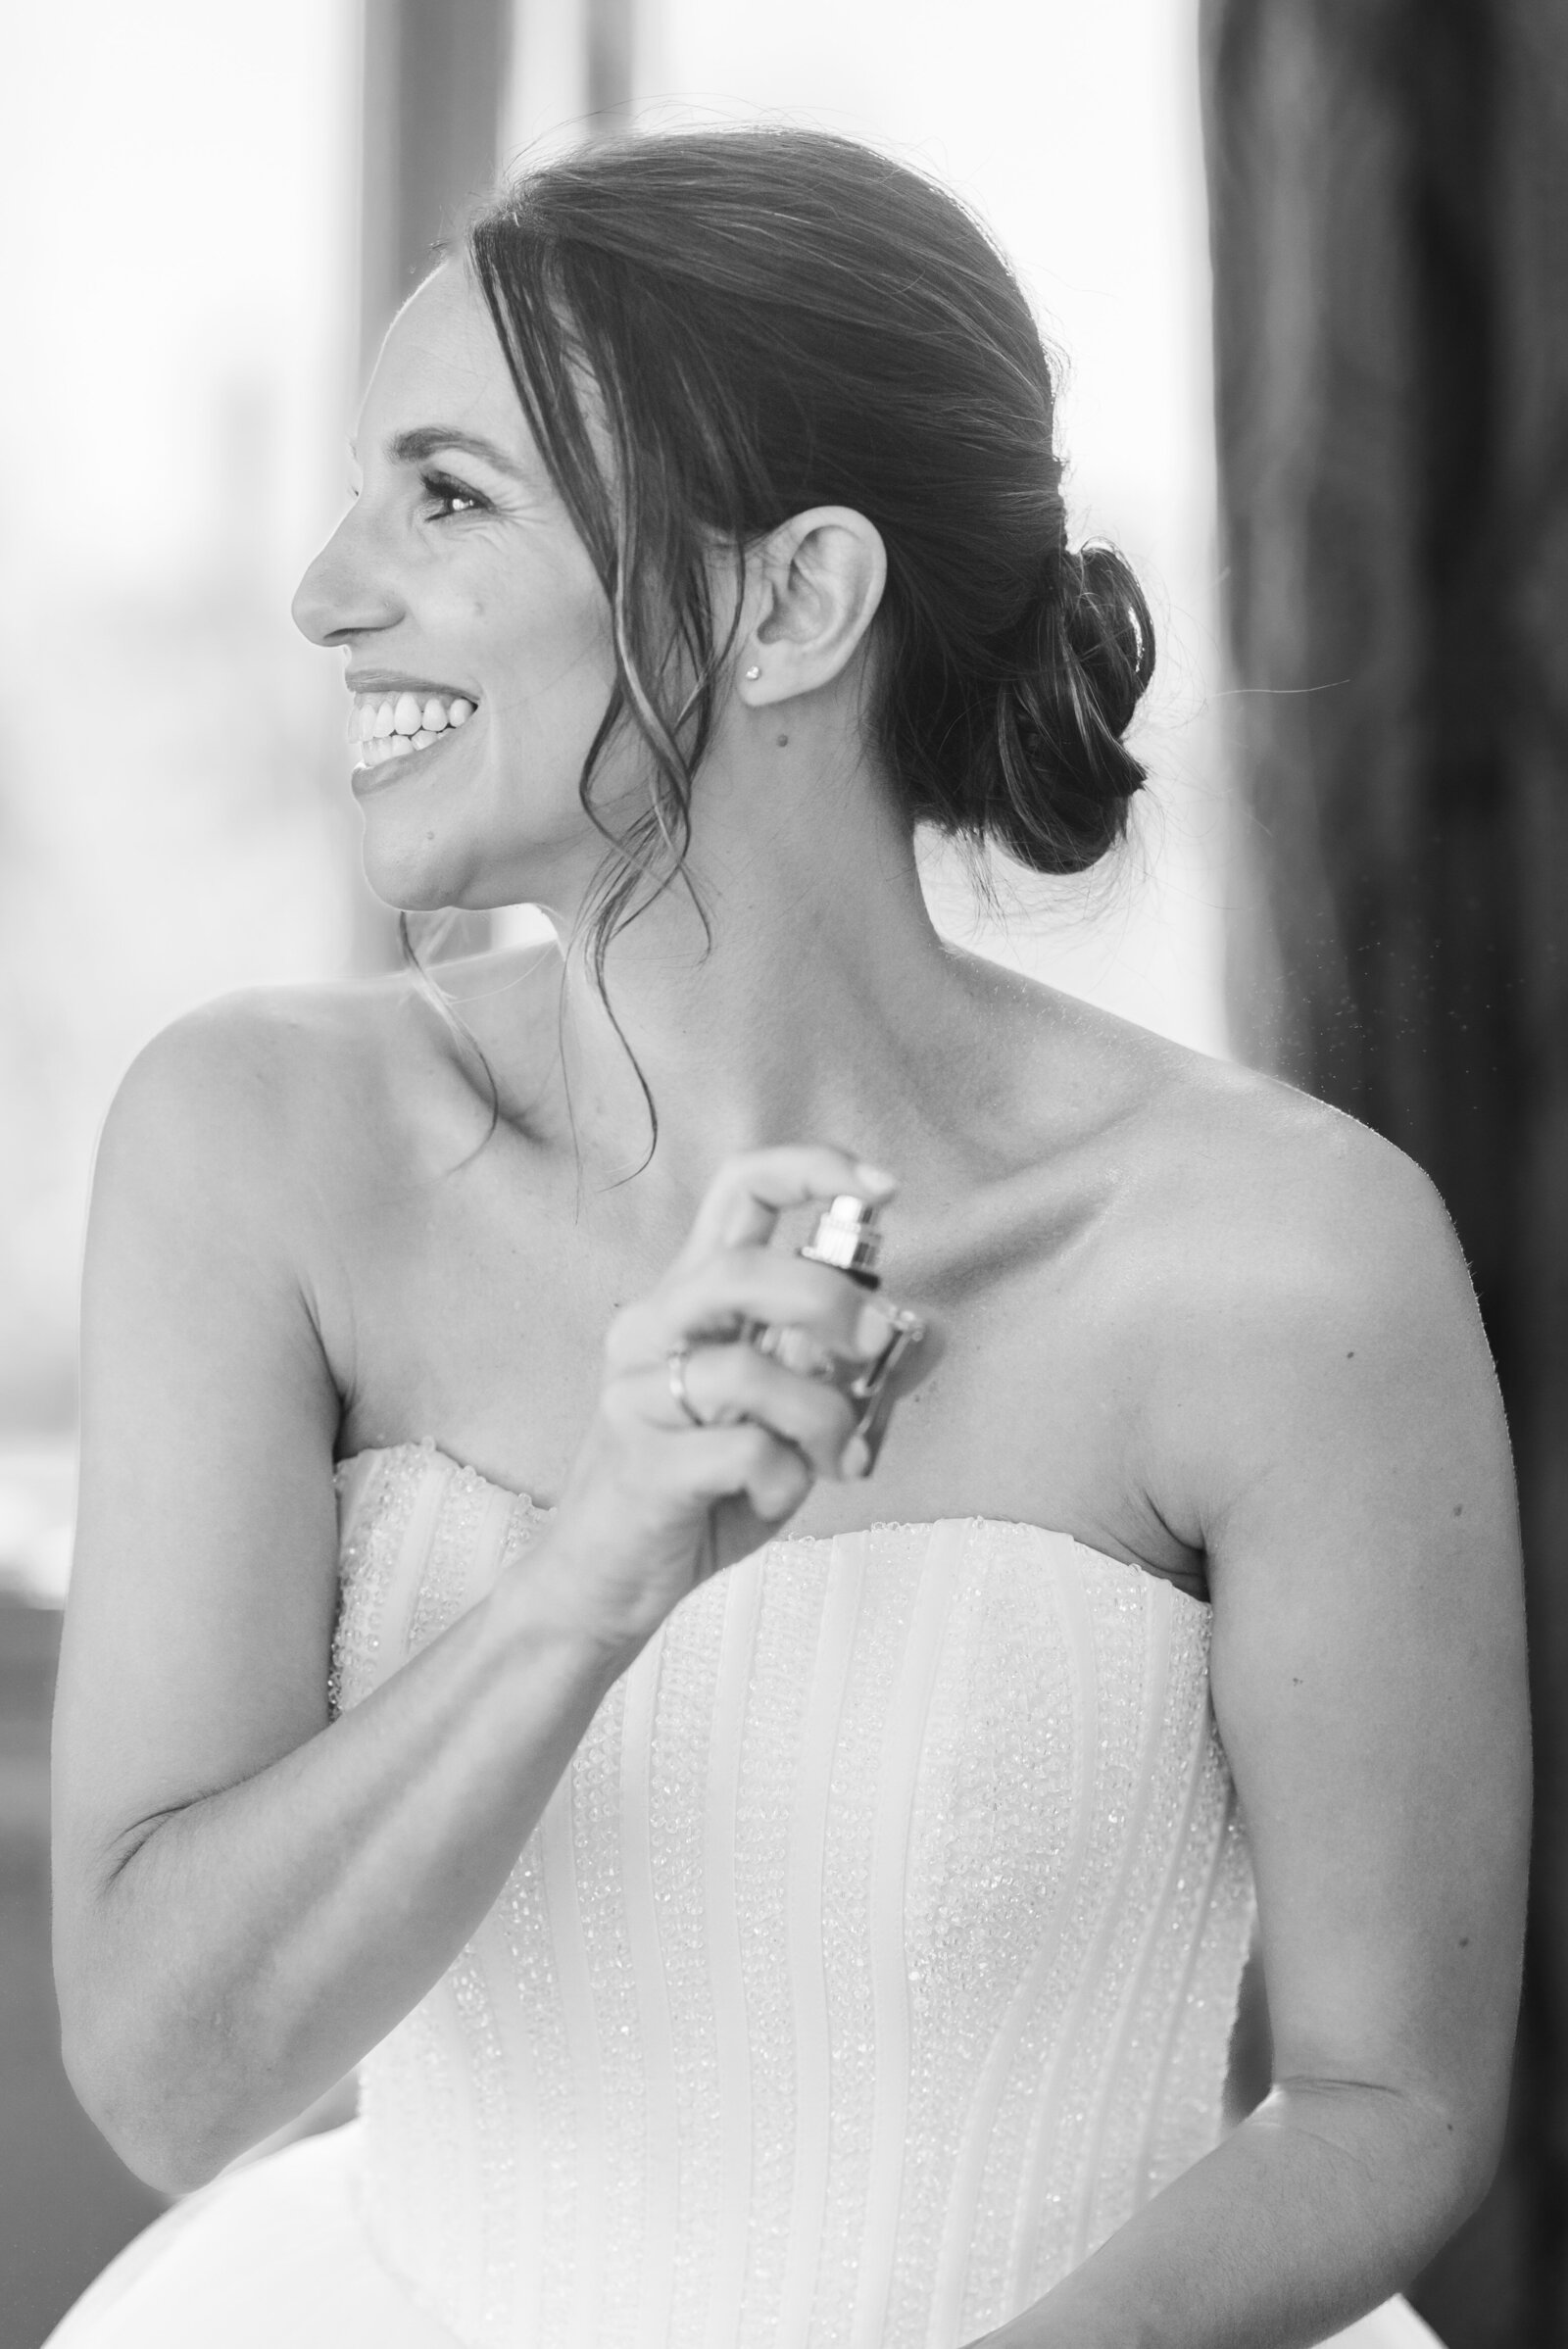 Black and White image of a bride spraying on her perfume, she is looking to the left and smiling. Her dress is strapless and ballgown in style.